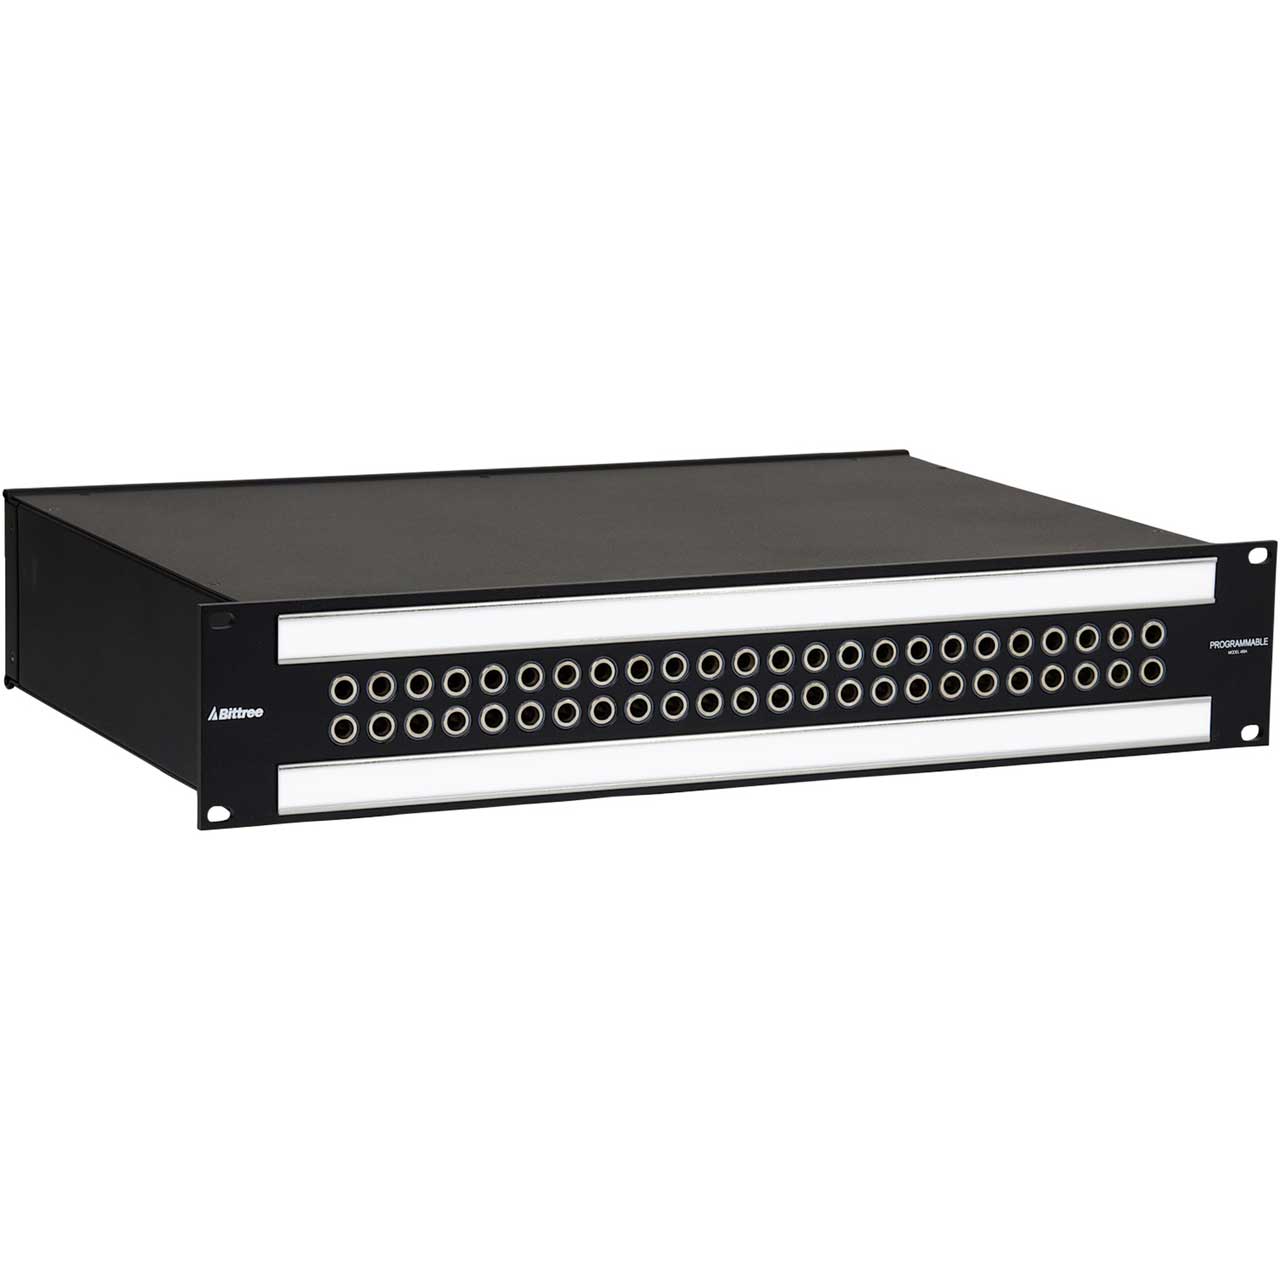 Bittree B48DC-FNPBT/E3 M2OU12L 2RU Black 2x24 Mono Spaced Long-Frame Patchbay with 2 Over/Under Strips